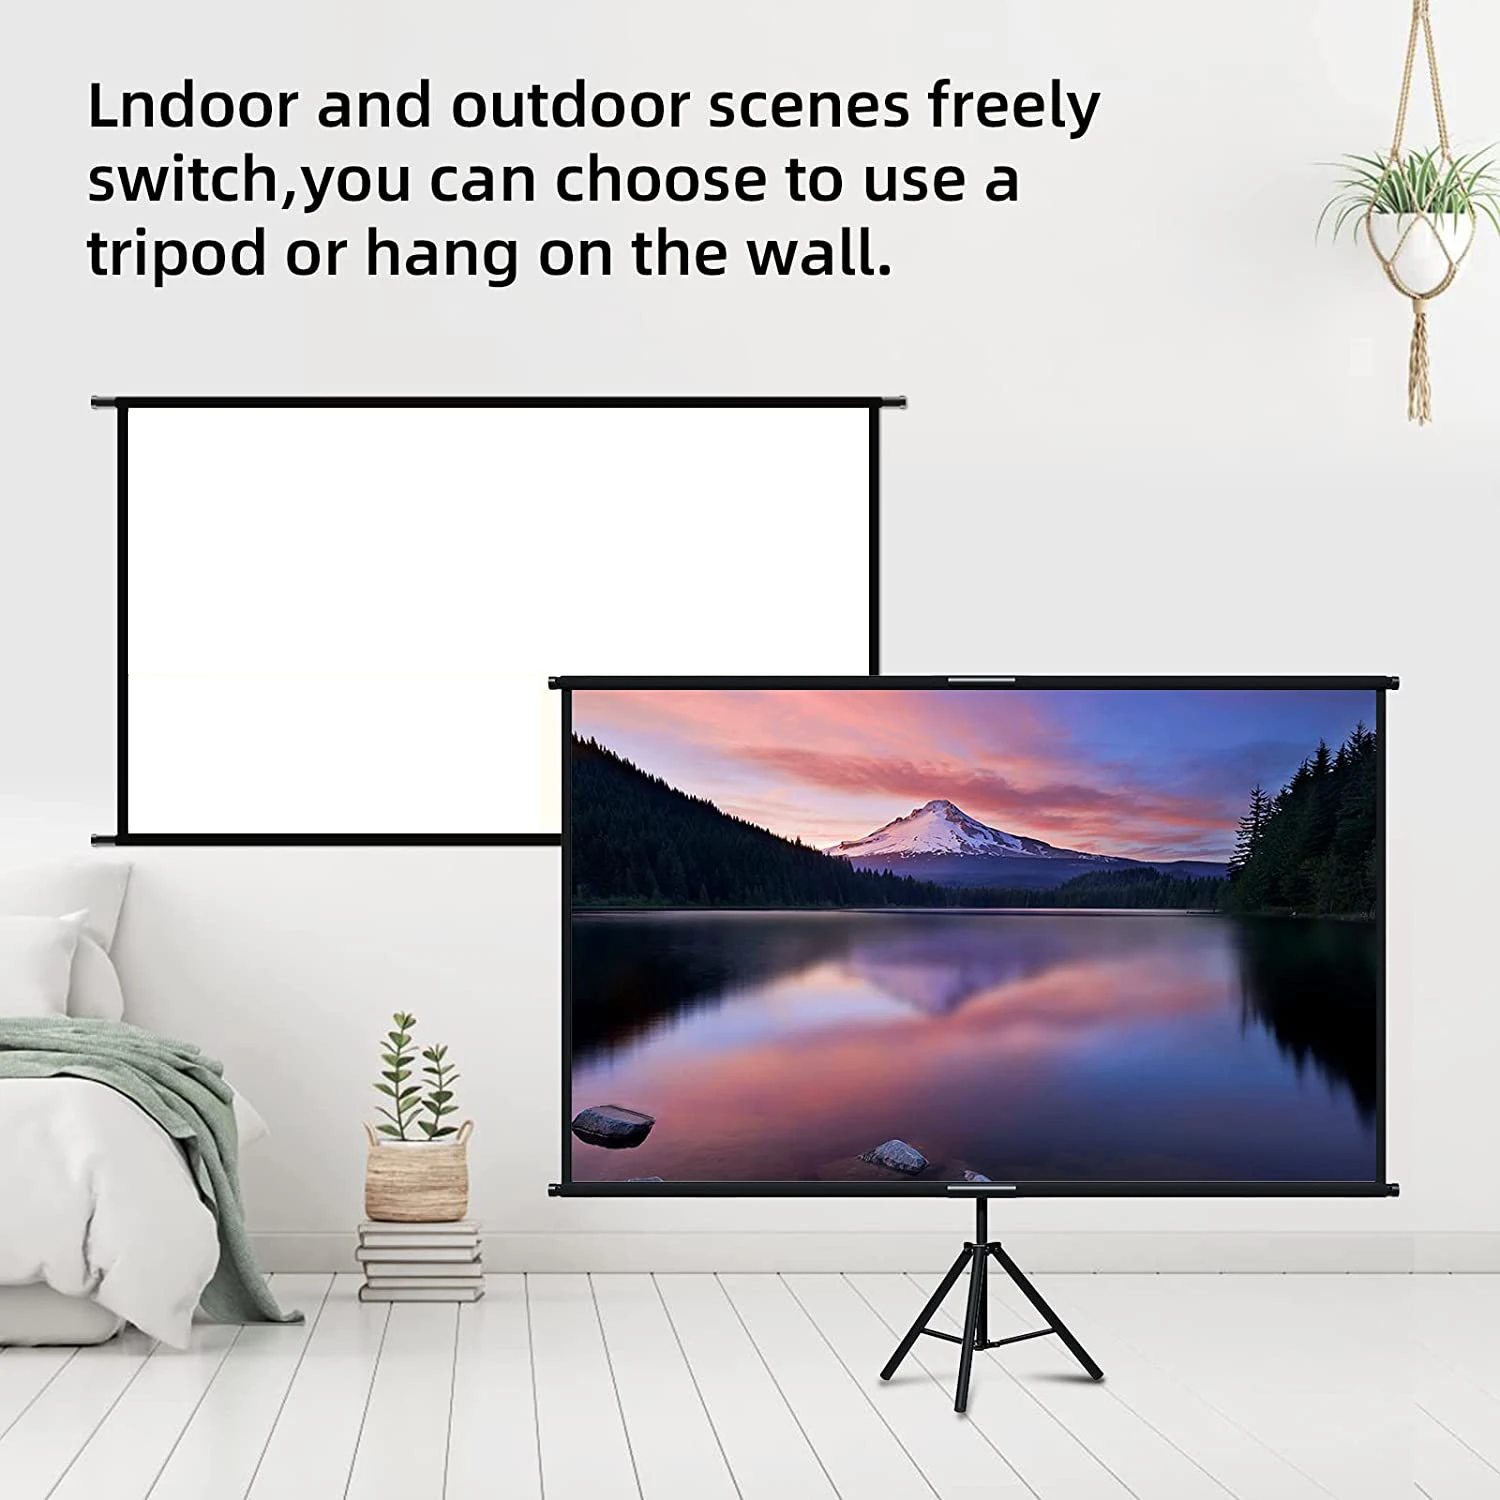 Projector Screen With Stand Foldable White Wrinkle-Free 60-120 inch 16:9 Screen With Bag for Home Theater Indoor Outdoor